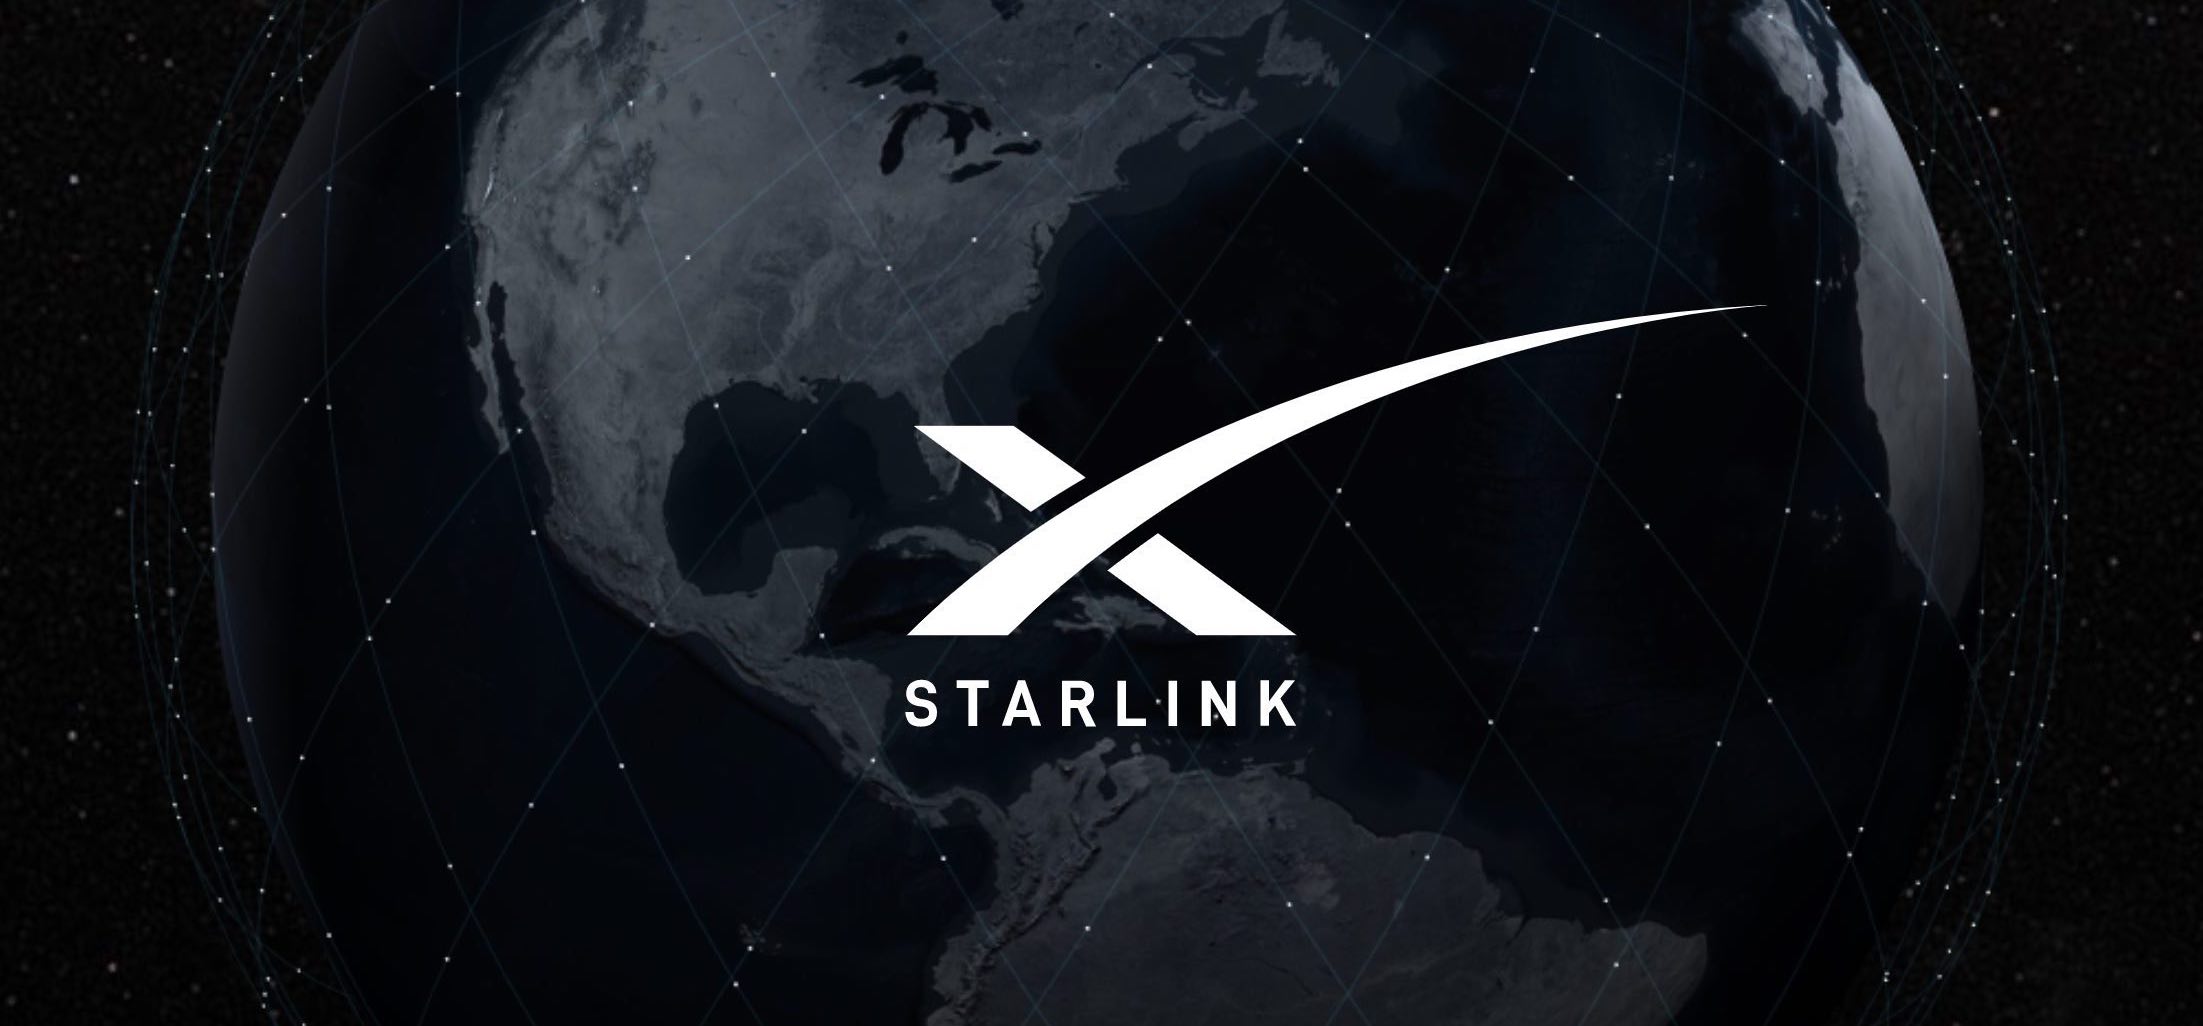 SpaceX Starlink